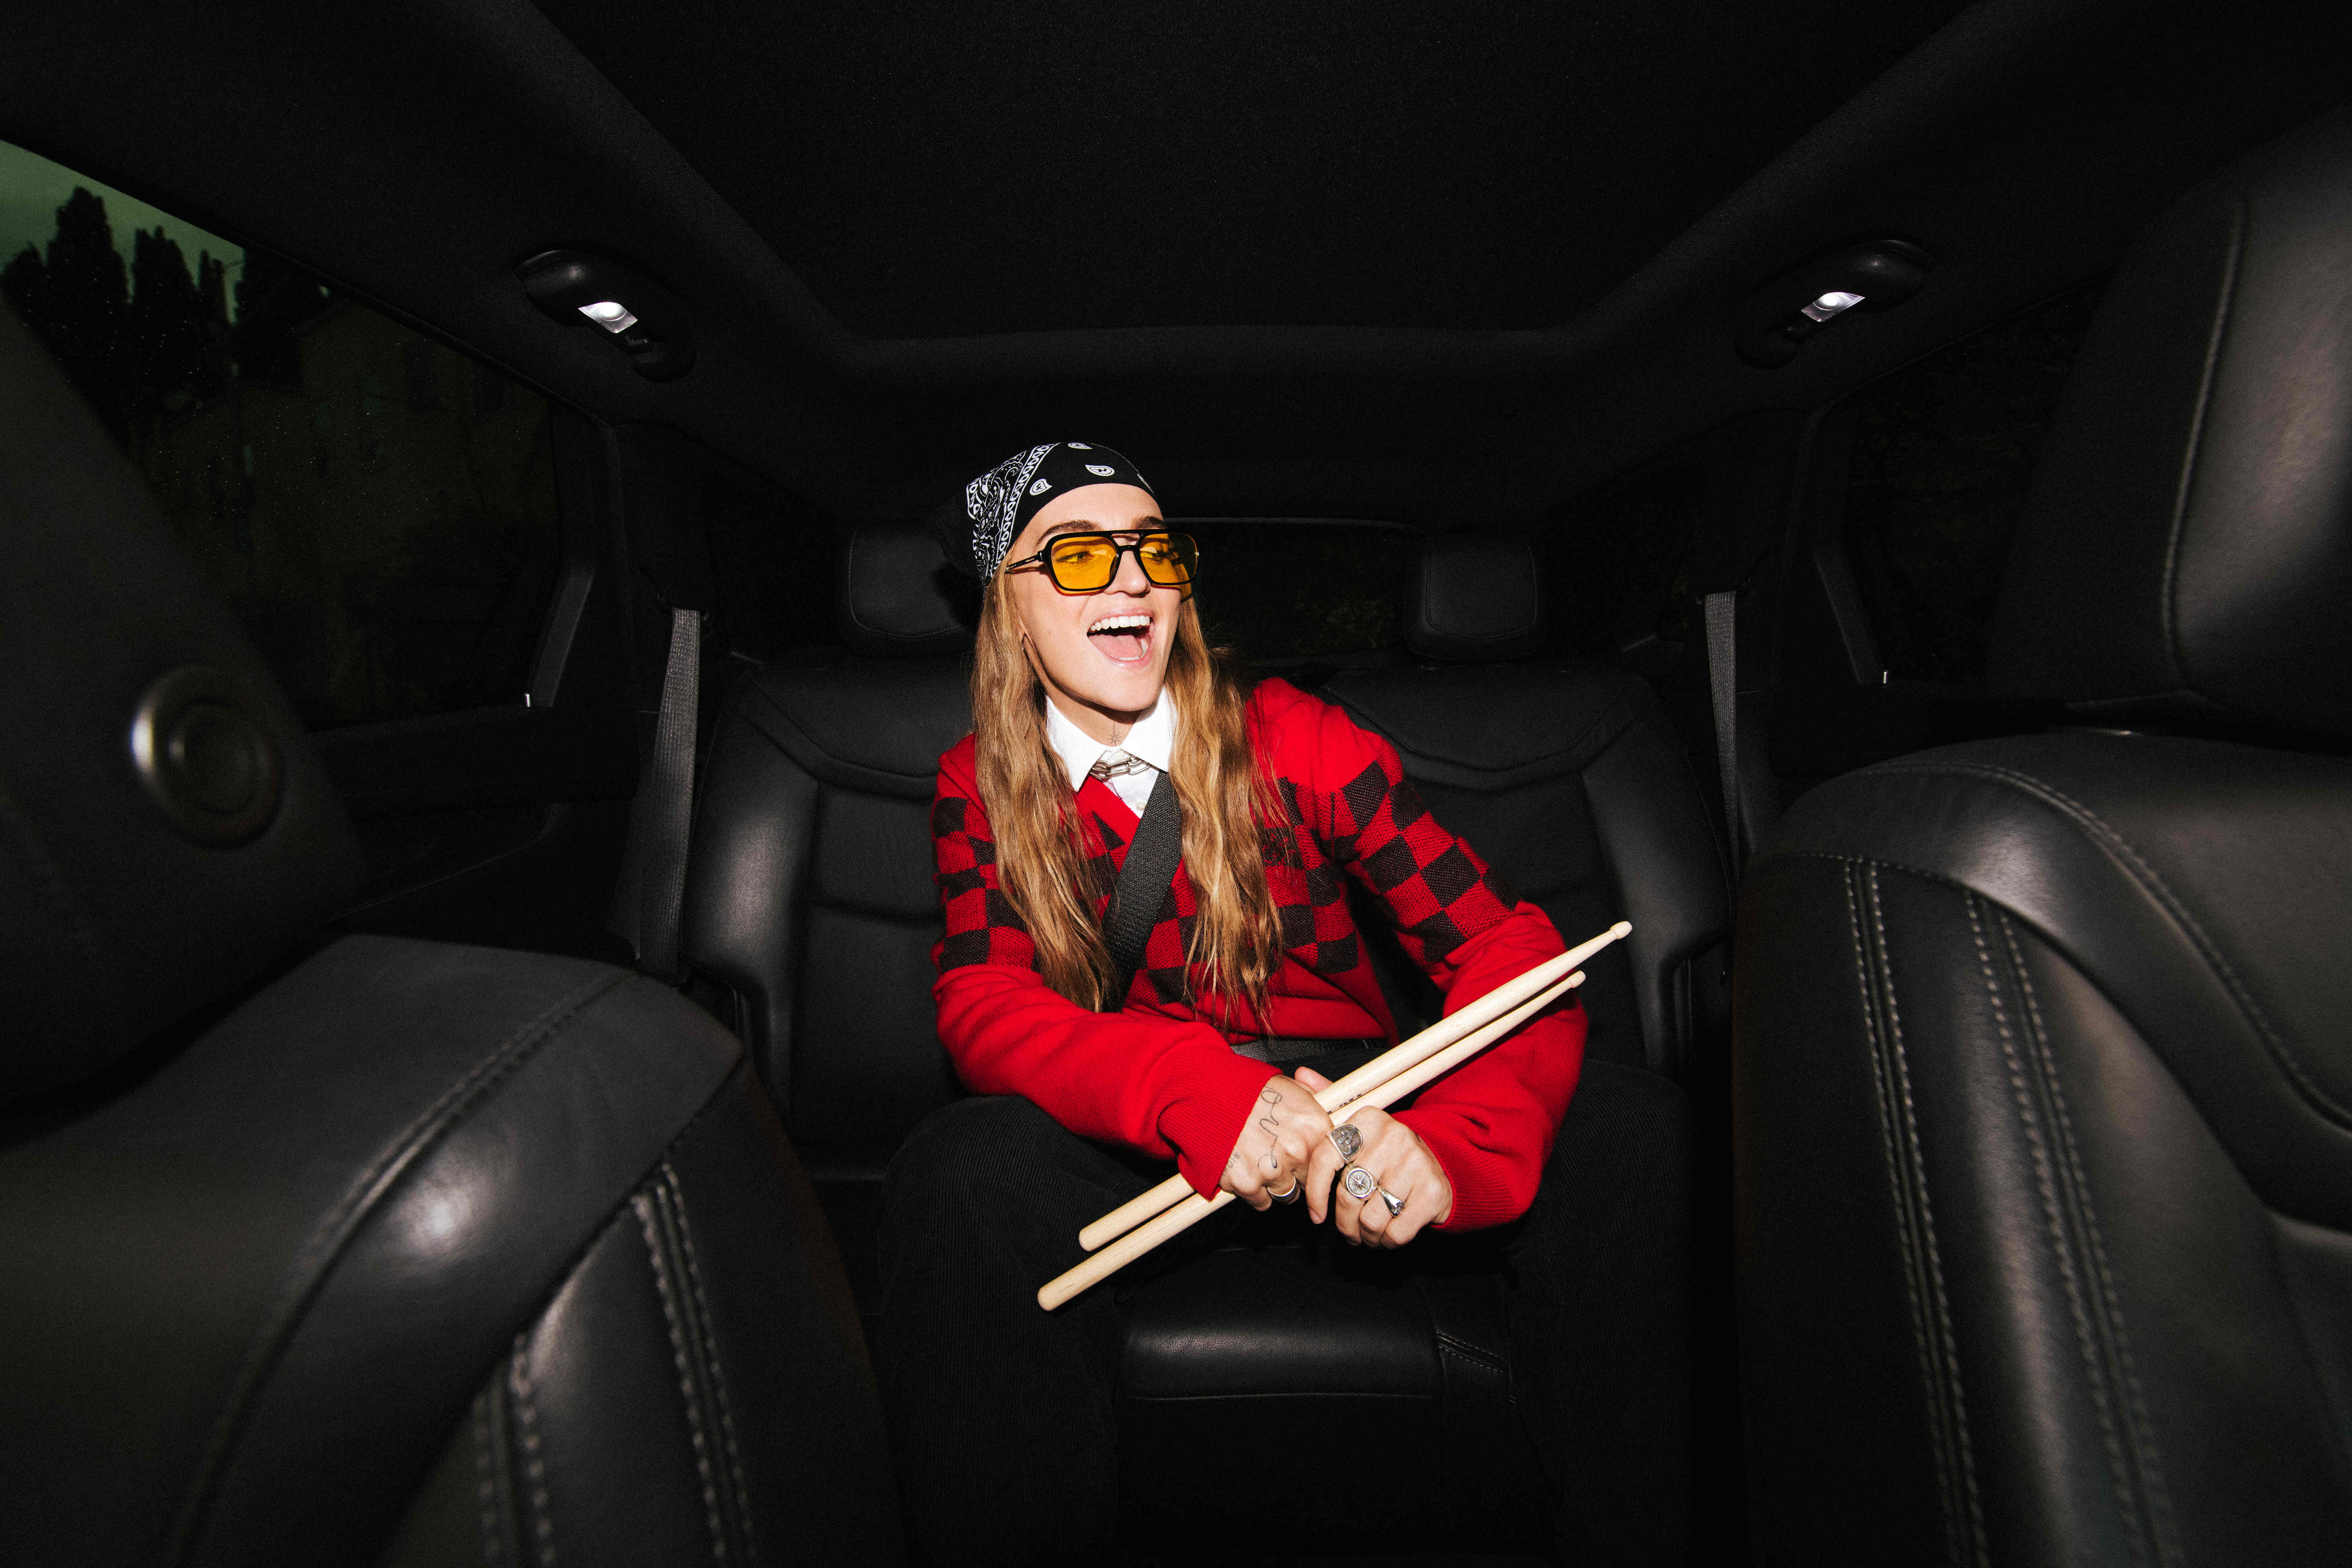 Person in school-inspired outfit with tie and sweater, holding drumsticks, seated in a car